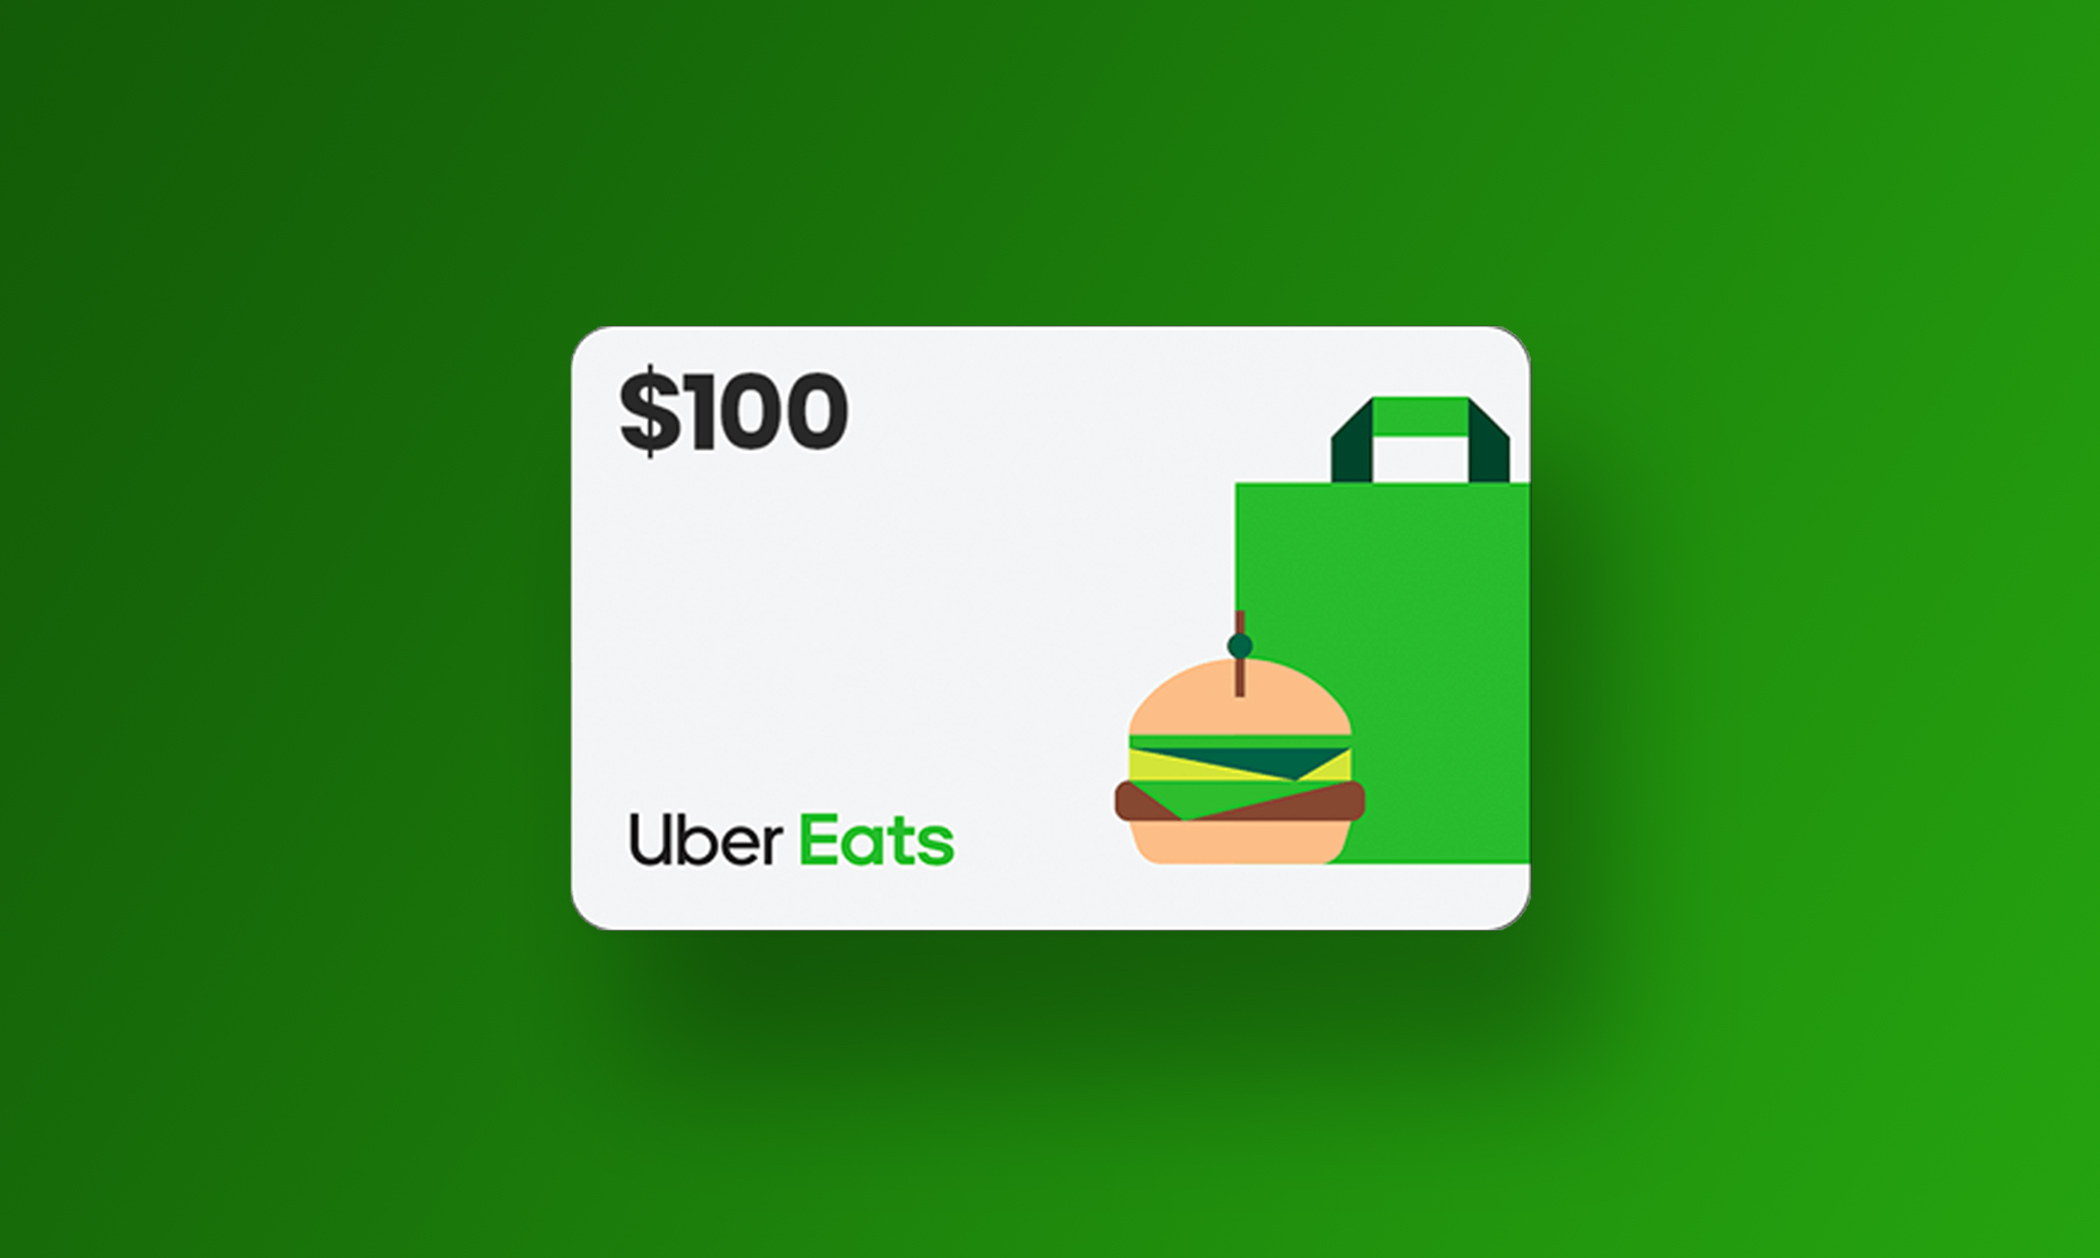 Enter to Win a 100 Uber Eats Gift Card! OKWow Sweepstakes and